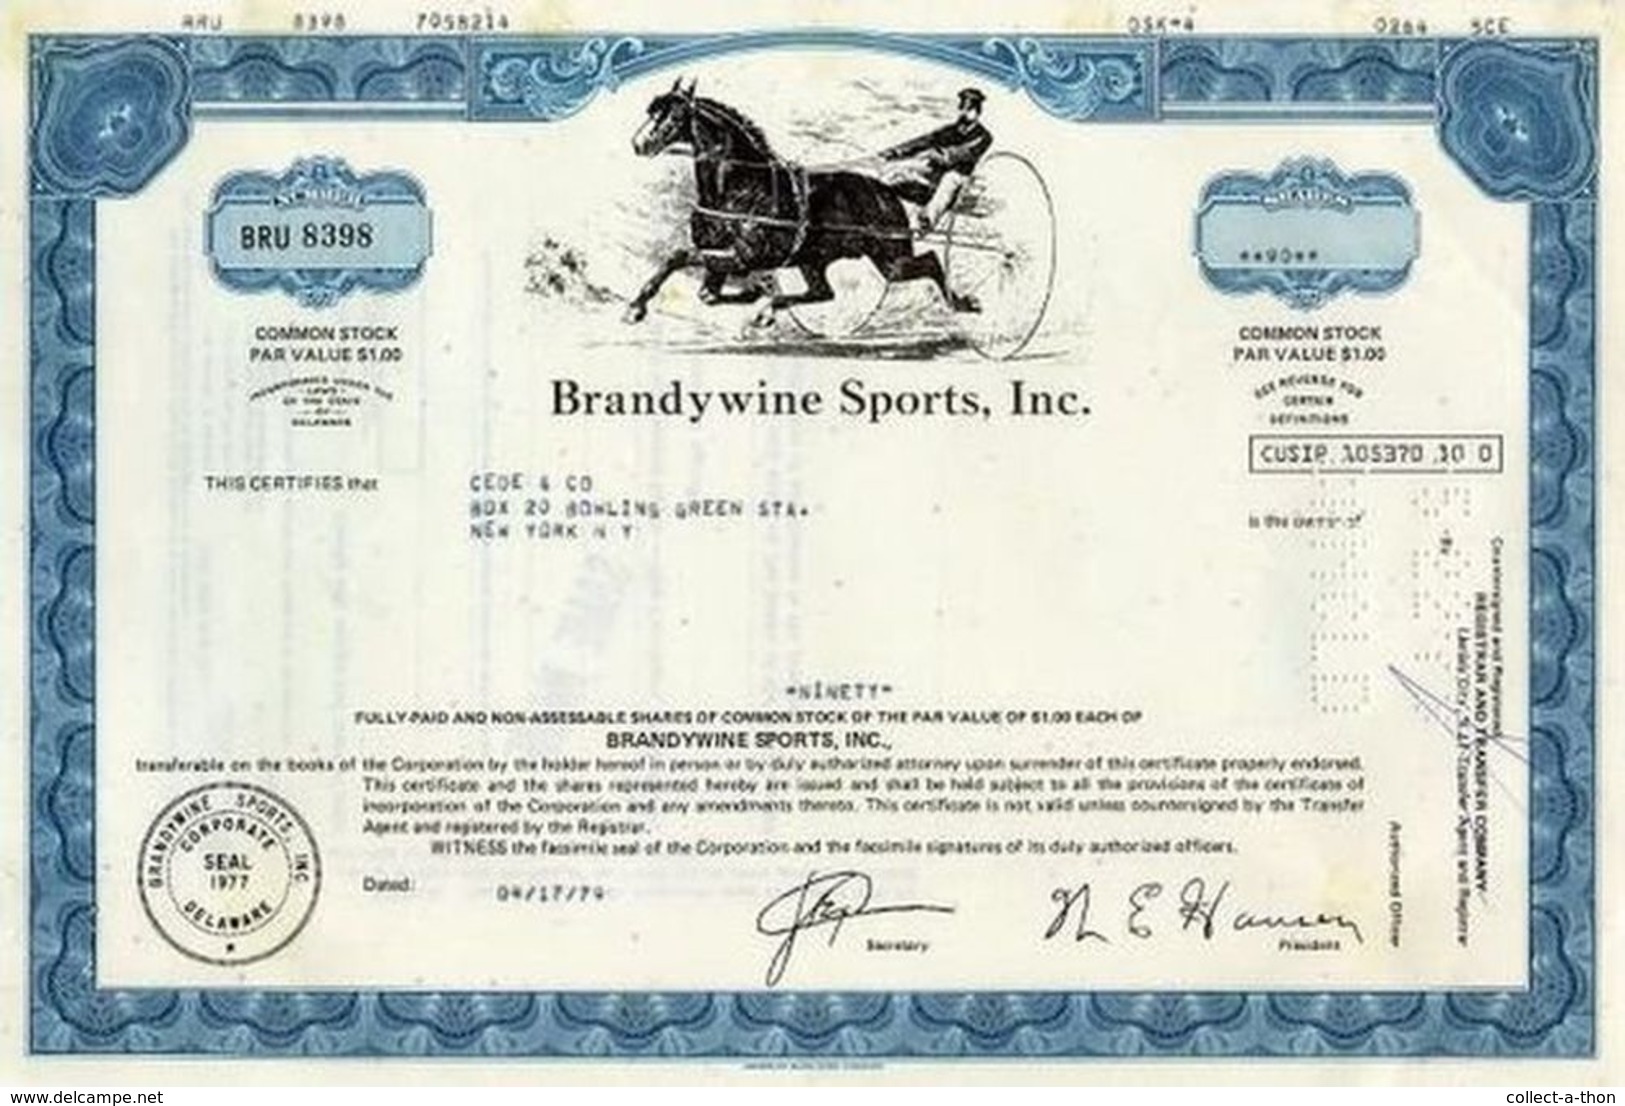 100 DIFFERENT ANTIQUE U.S. STOCK CERTIFICATES (1940's-1980's) in EXCELLENT CONDITION